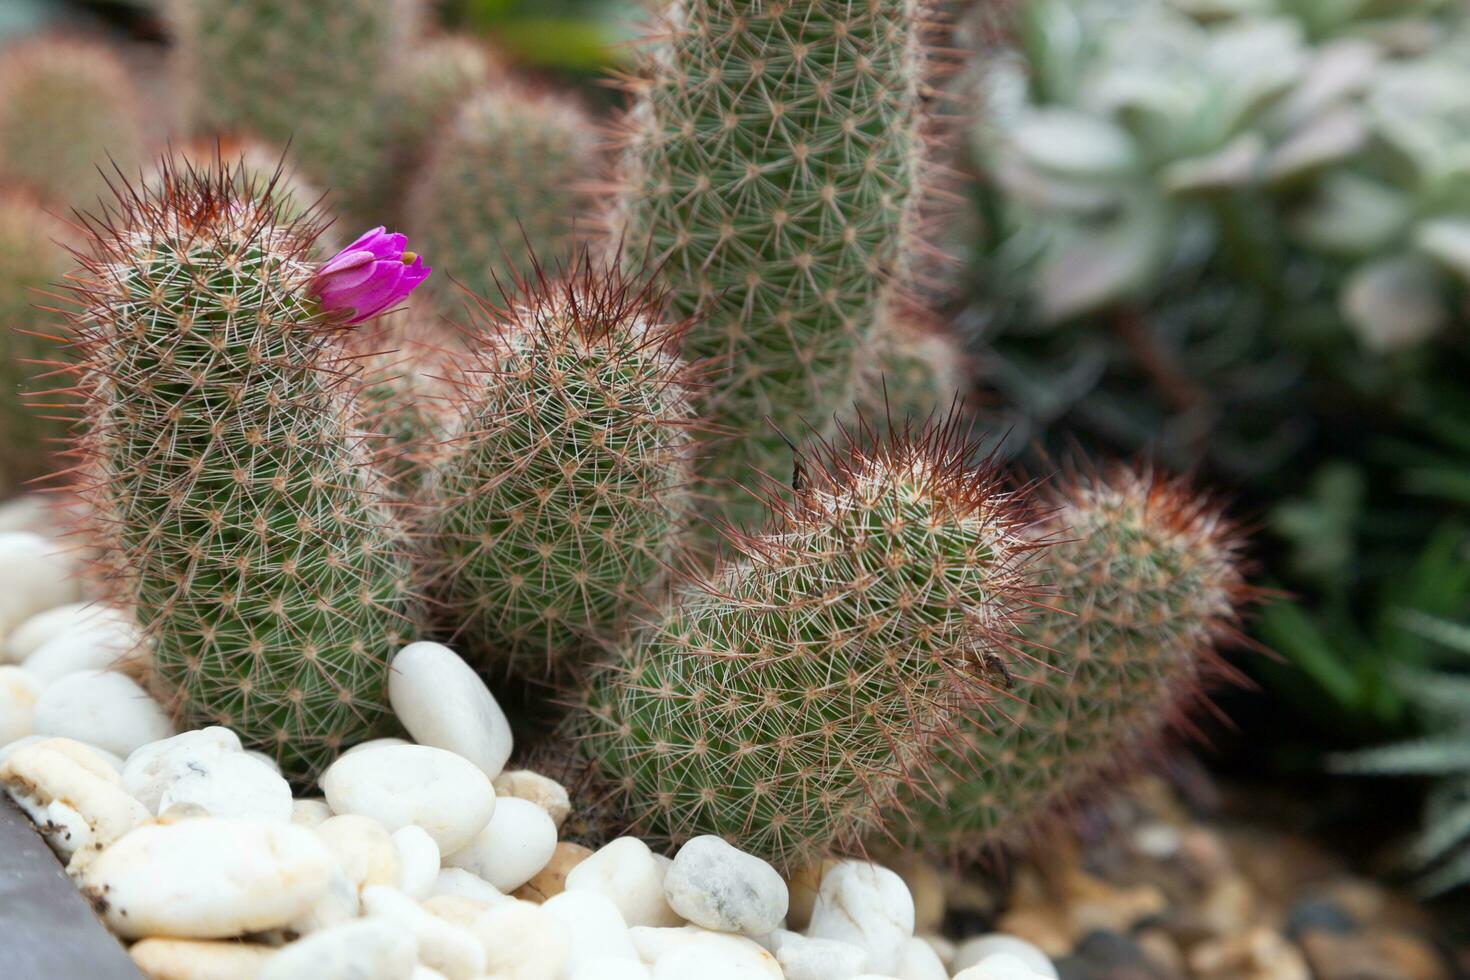 The Mammillaria spinosissima with pink flower. Small cactus landscaping in pots decorated with small stones of different colors. This kind of landscaping can beautify your home and take up less space. photo